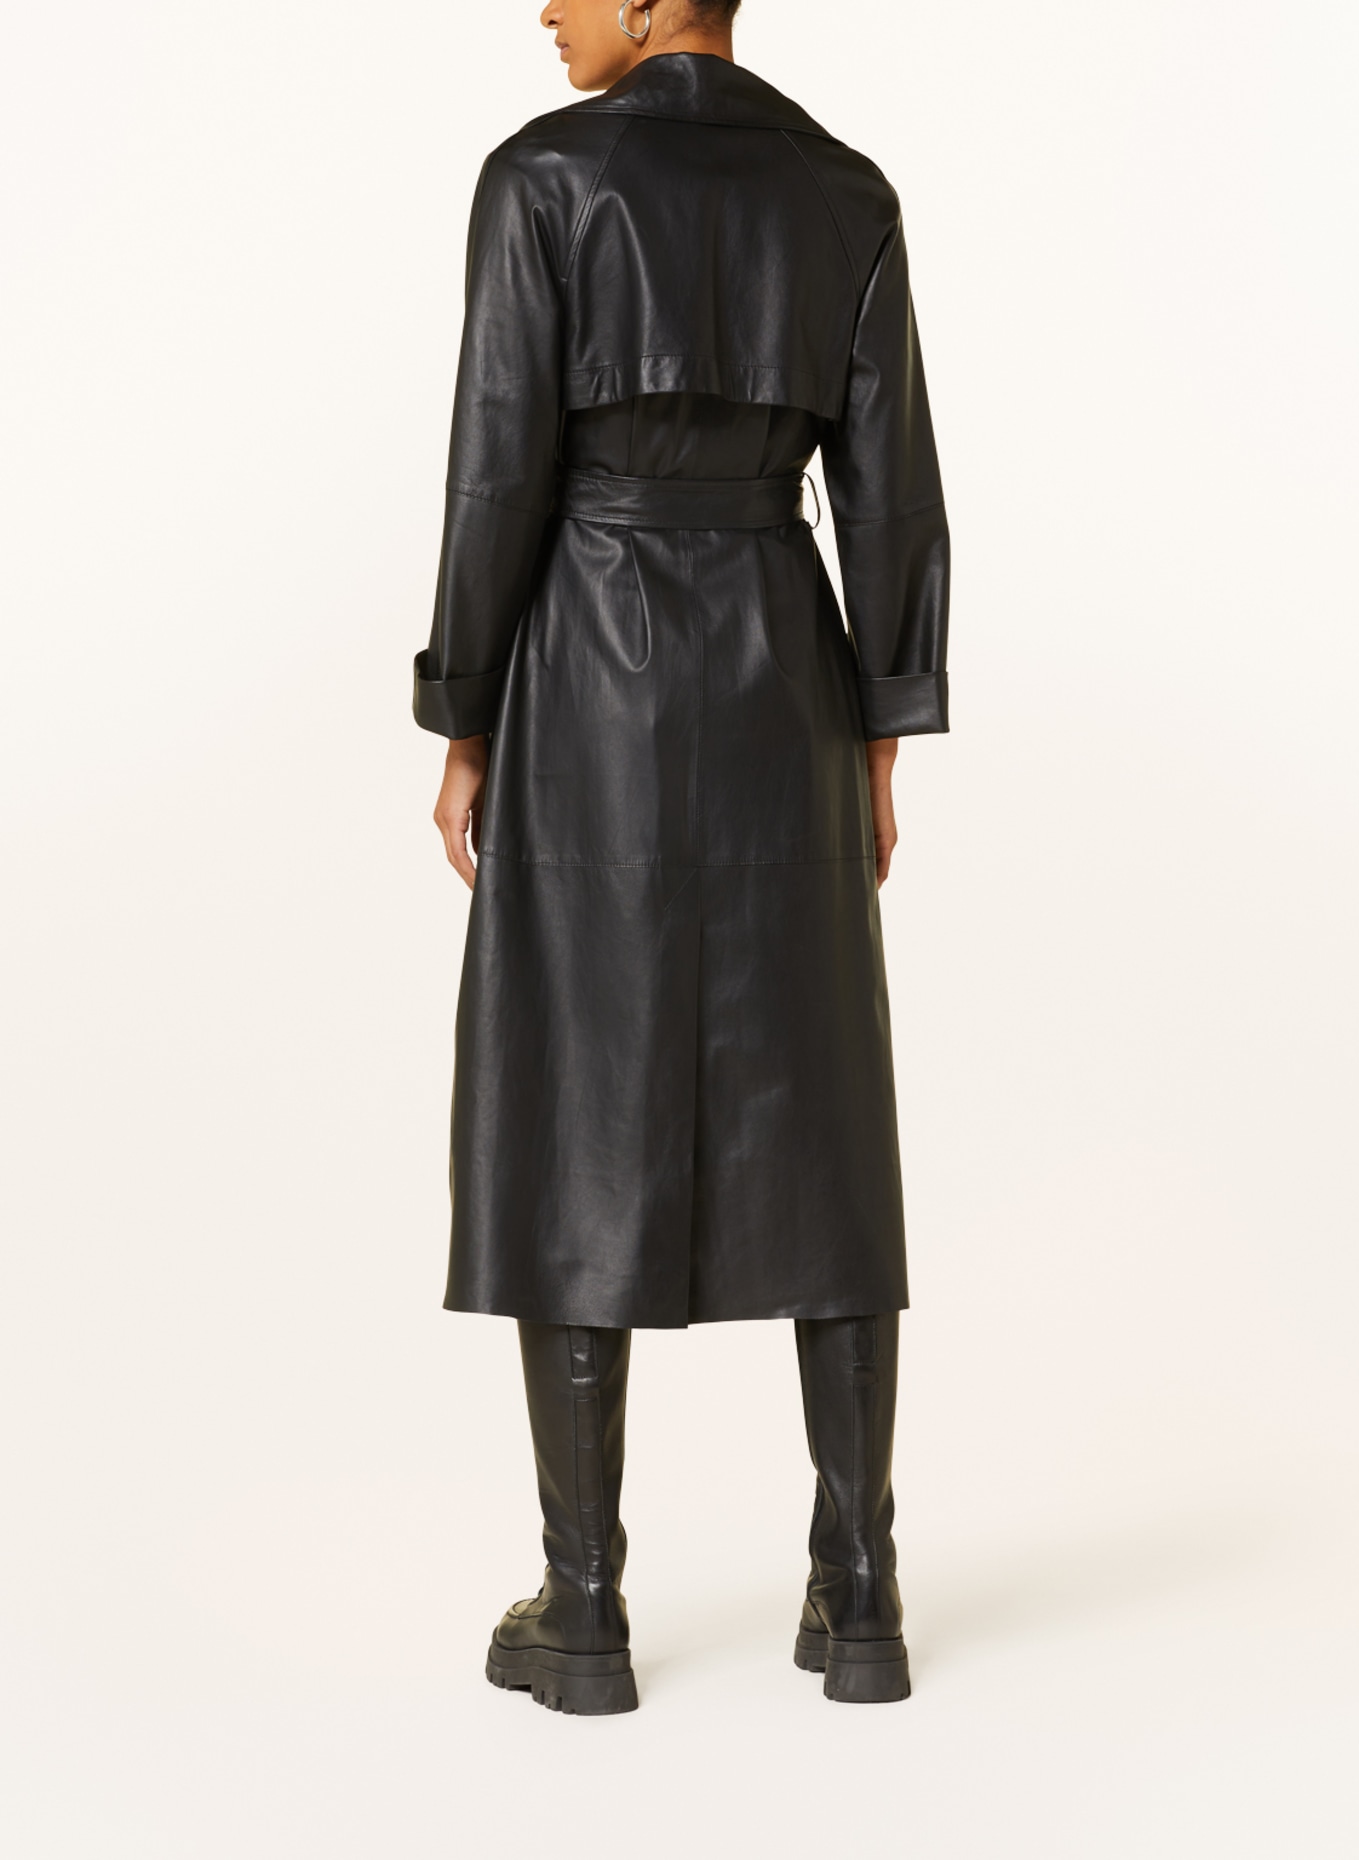 RIANI Trench coat made of leather, Color: BLACK (Image 3)